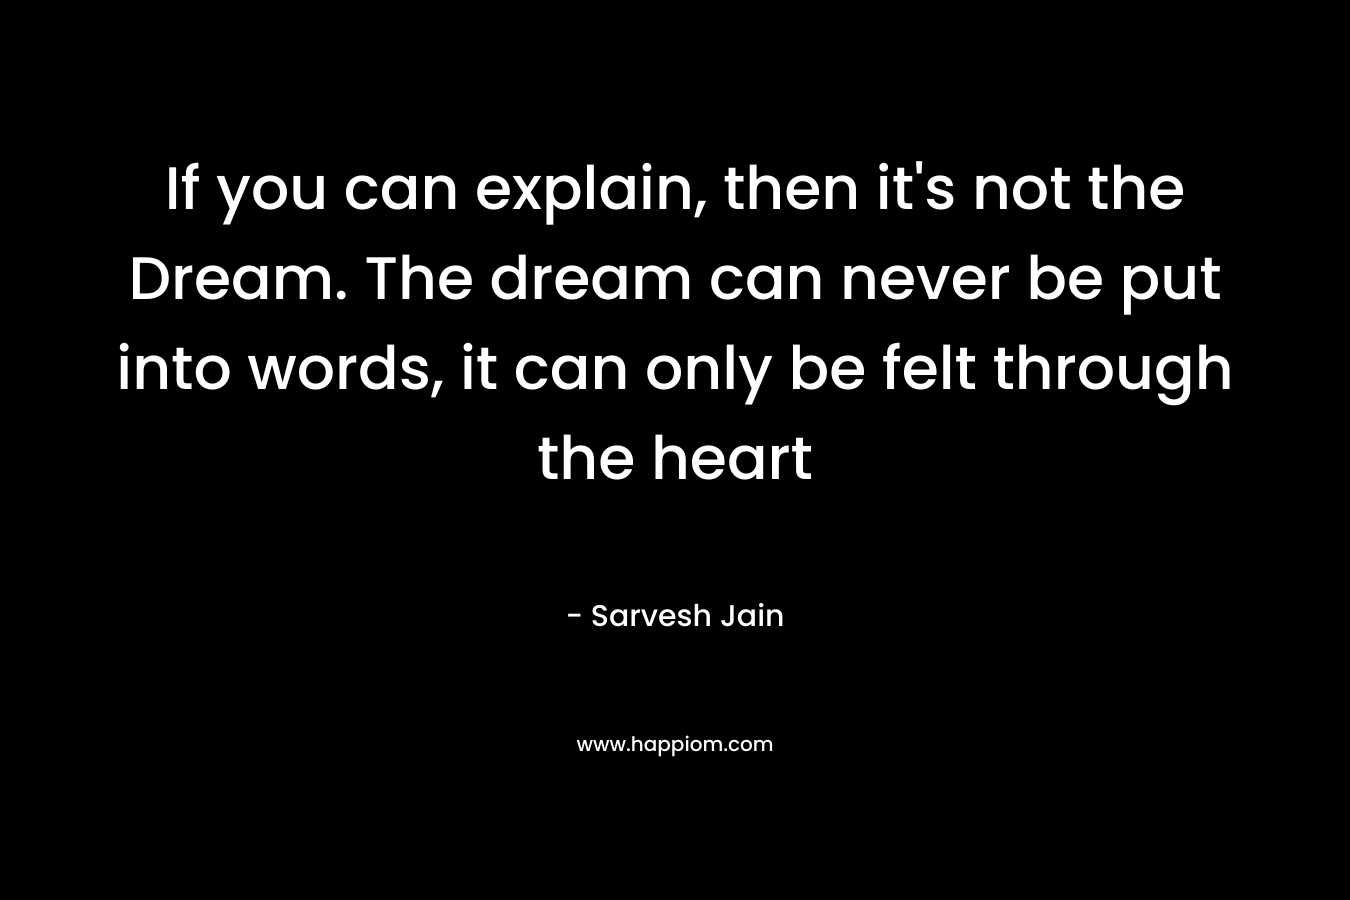 If you can explain, then it's not the Dream. The dream can never be put into words, it can only be felt through the heart